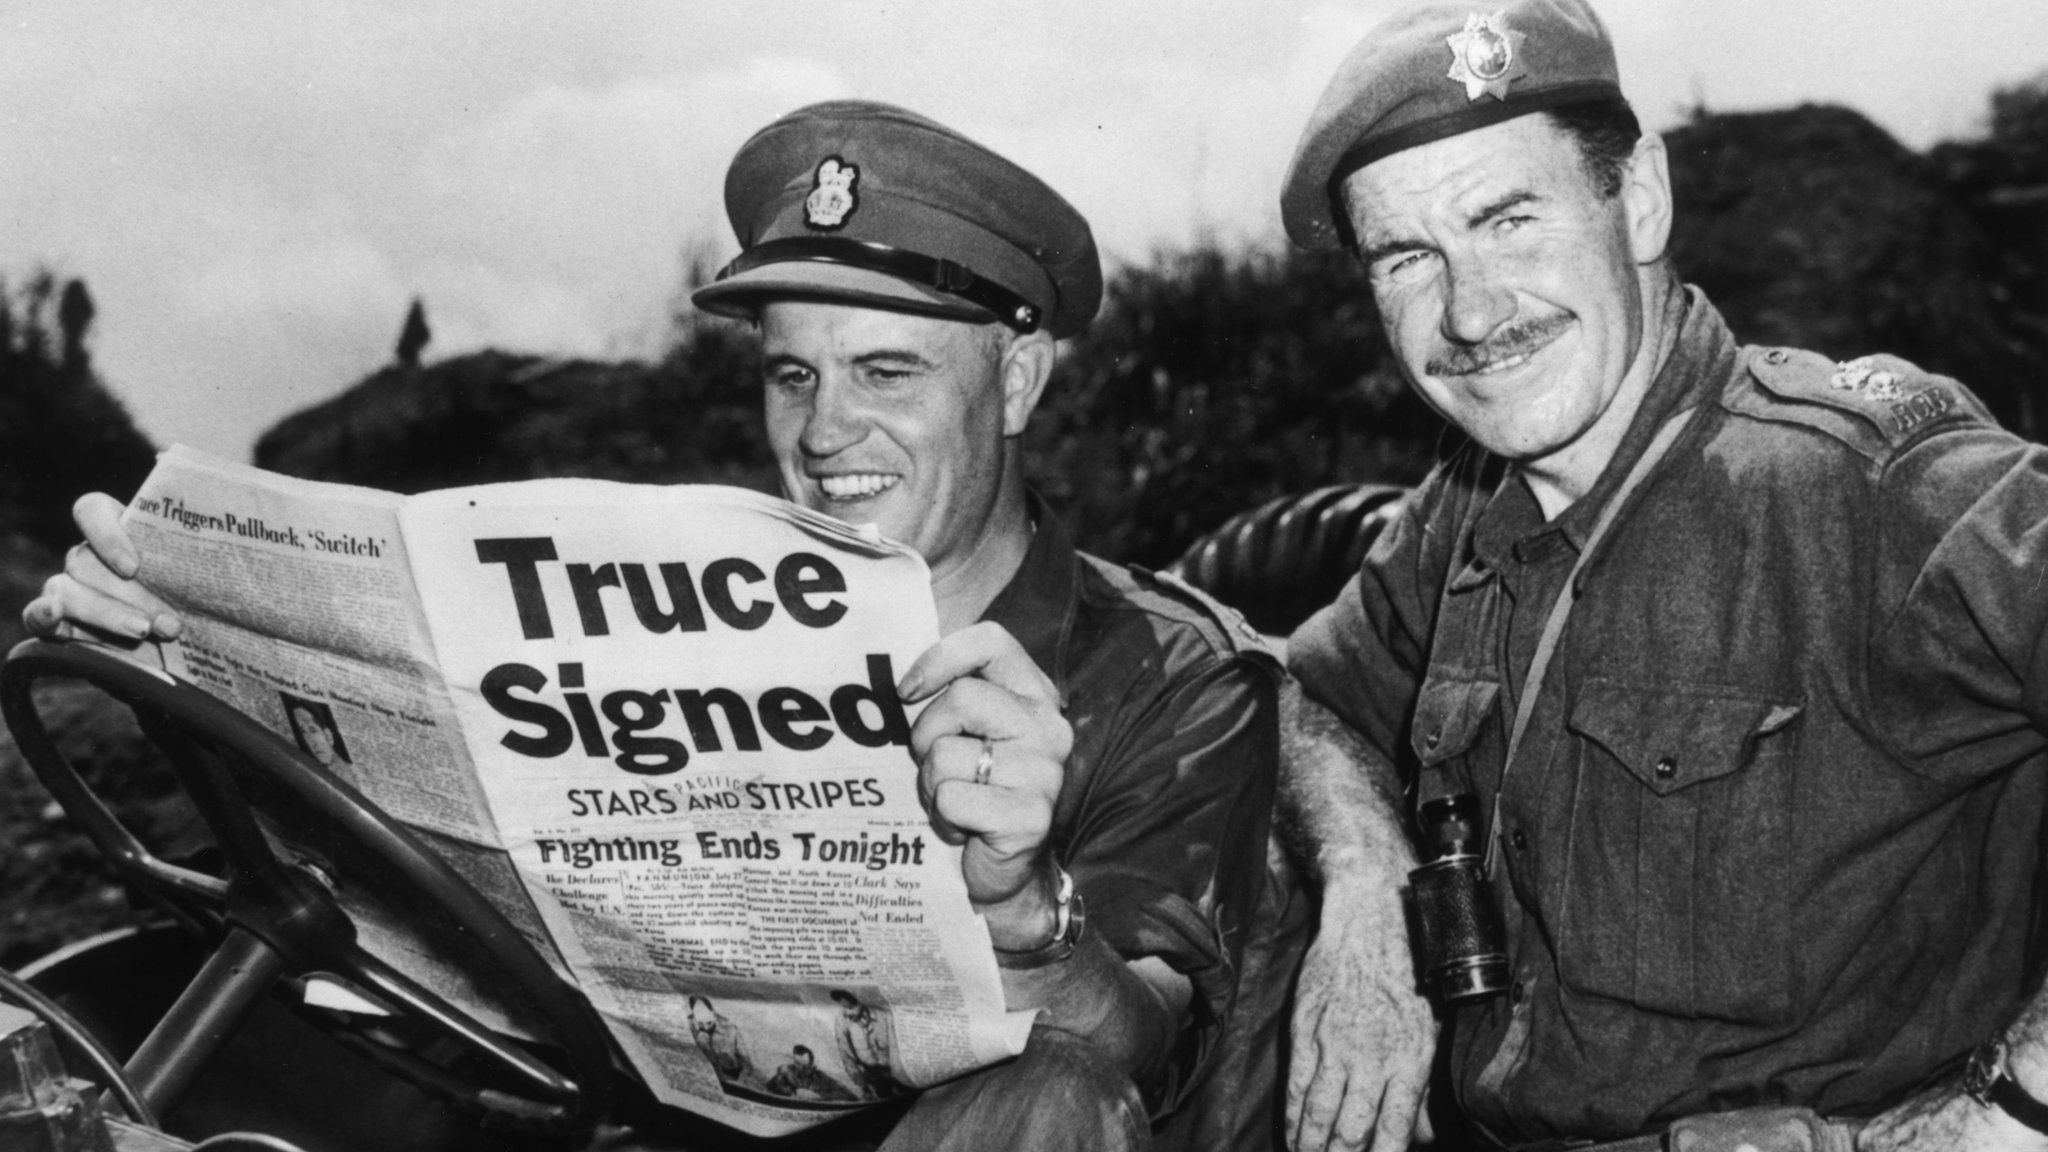 Brig Jean Allard, commanding officer of the Canadian Brigade, breaks the news of a truce in the Korean war to Col K L Campbell, commander of the 3rd battalion of the RCRS, on 2 August 1953